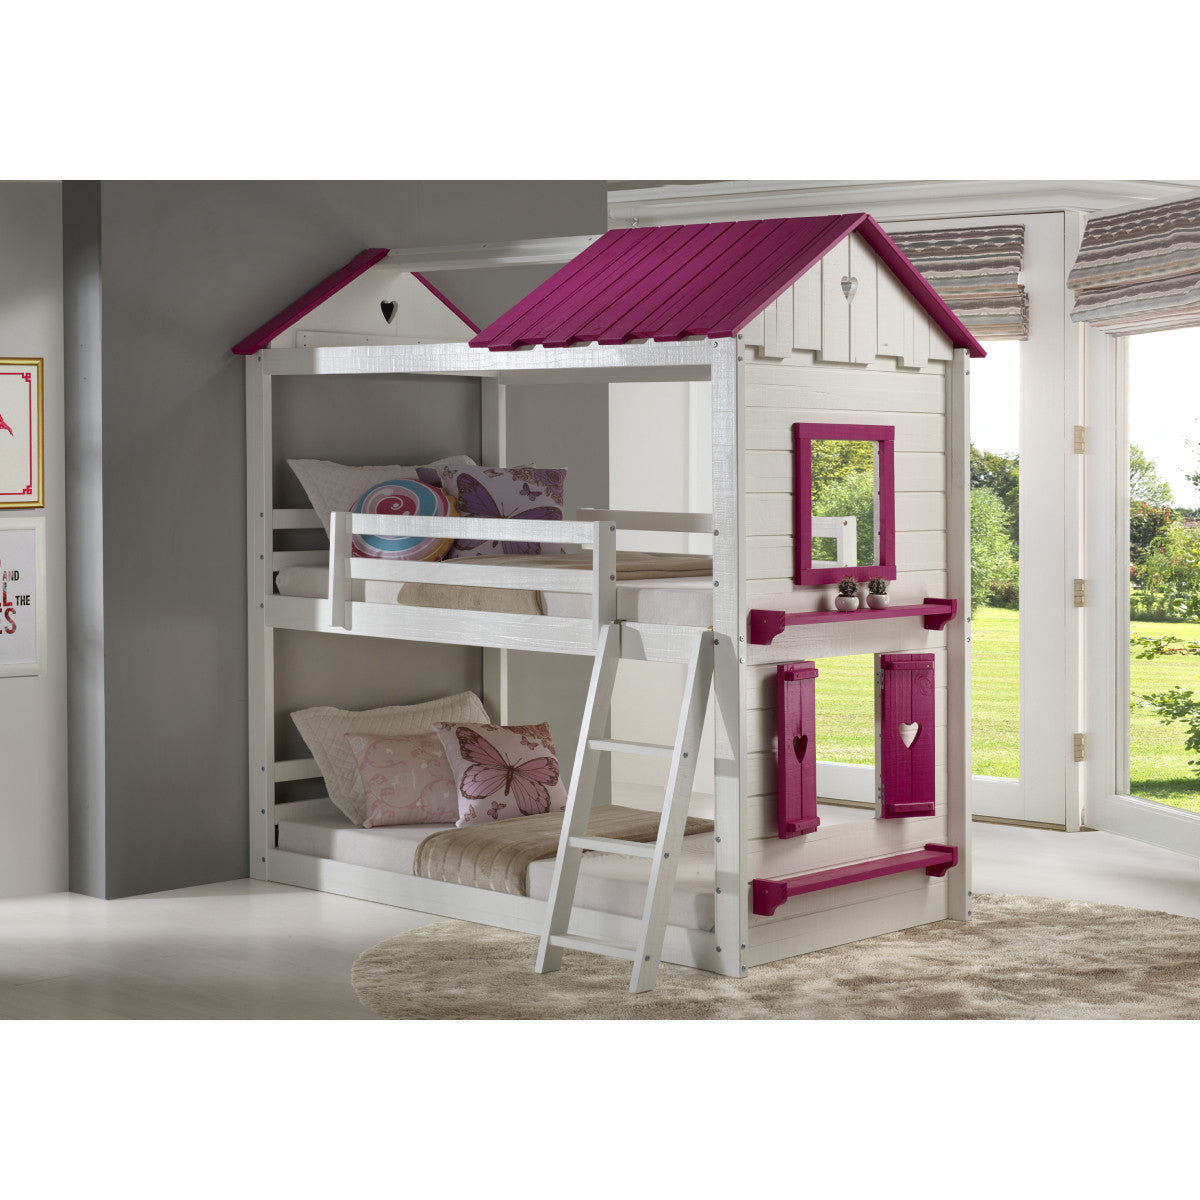 T/T SWEETHEART BUNK WHITE & PINK